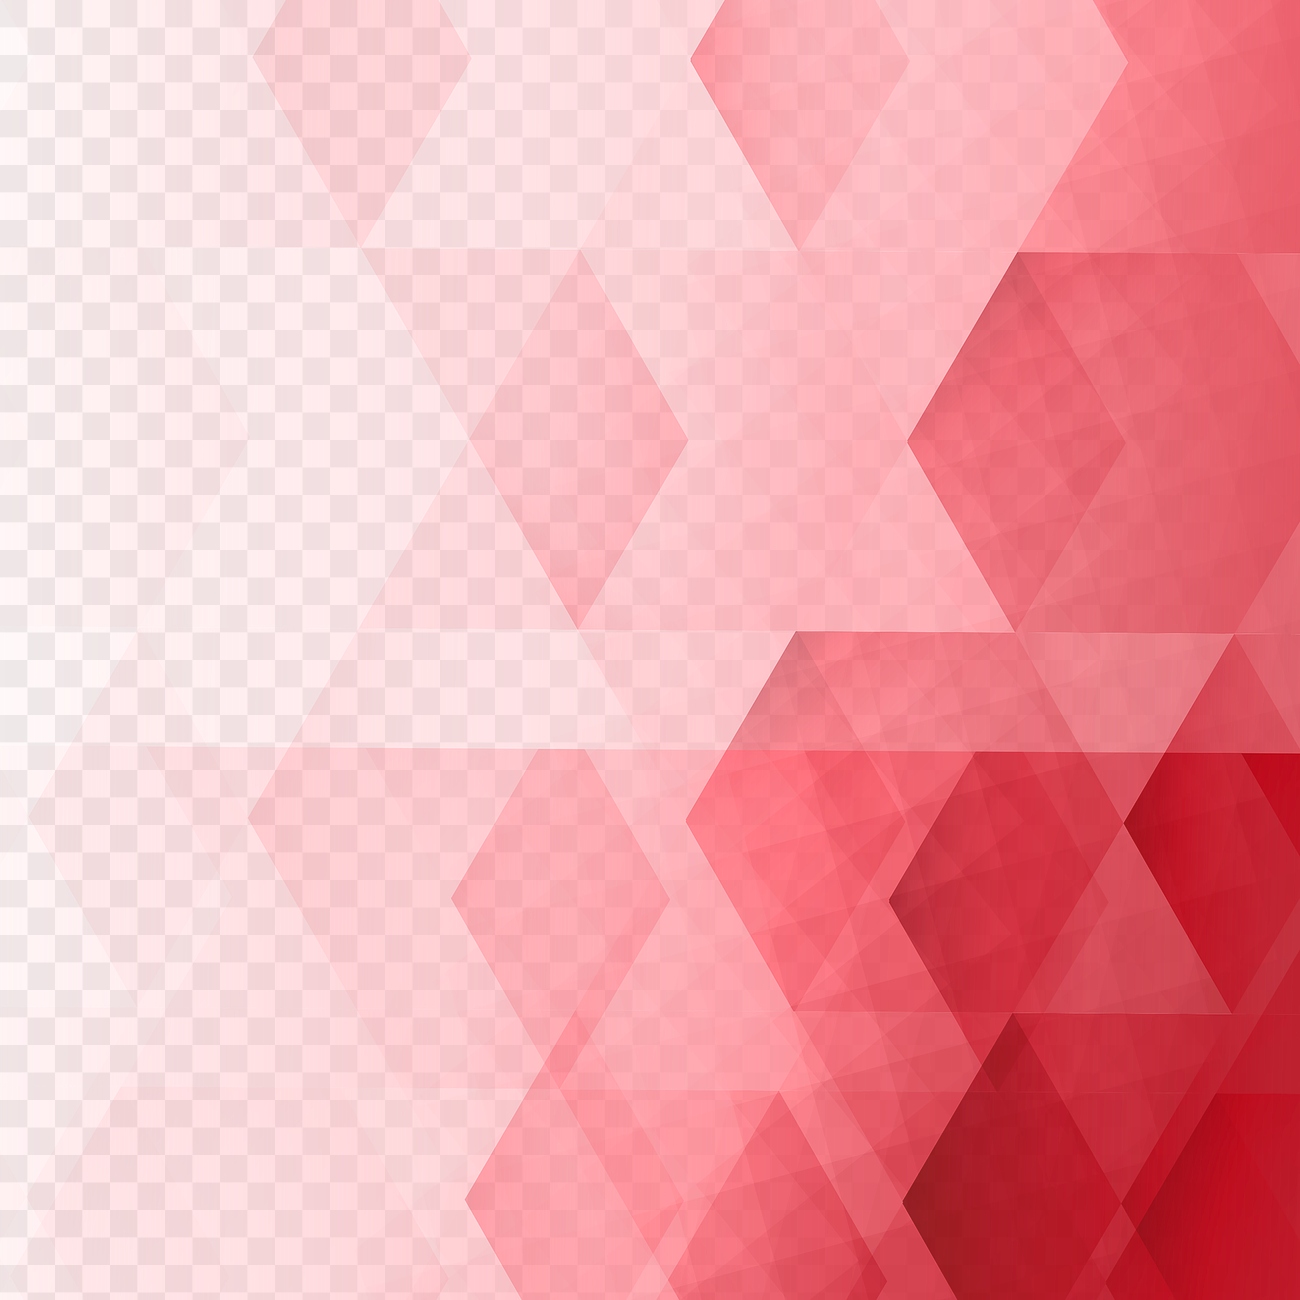 Free royalty image about Ombre red mosaic background illustration ...